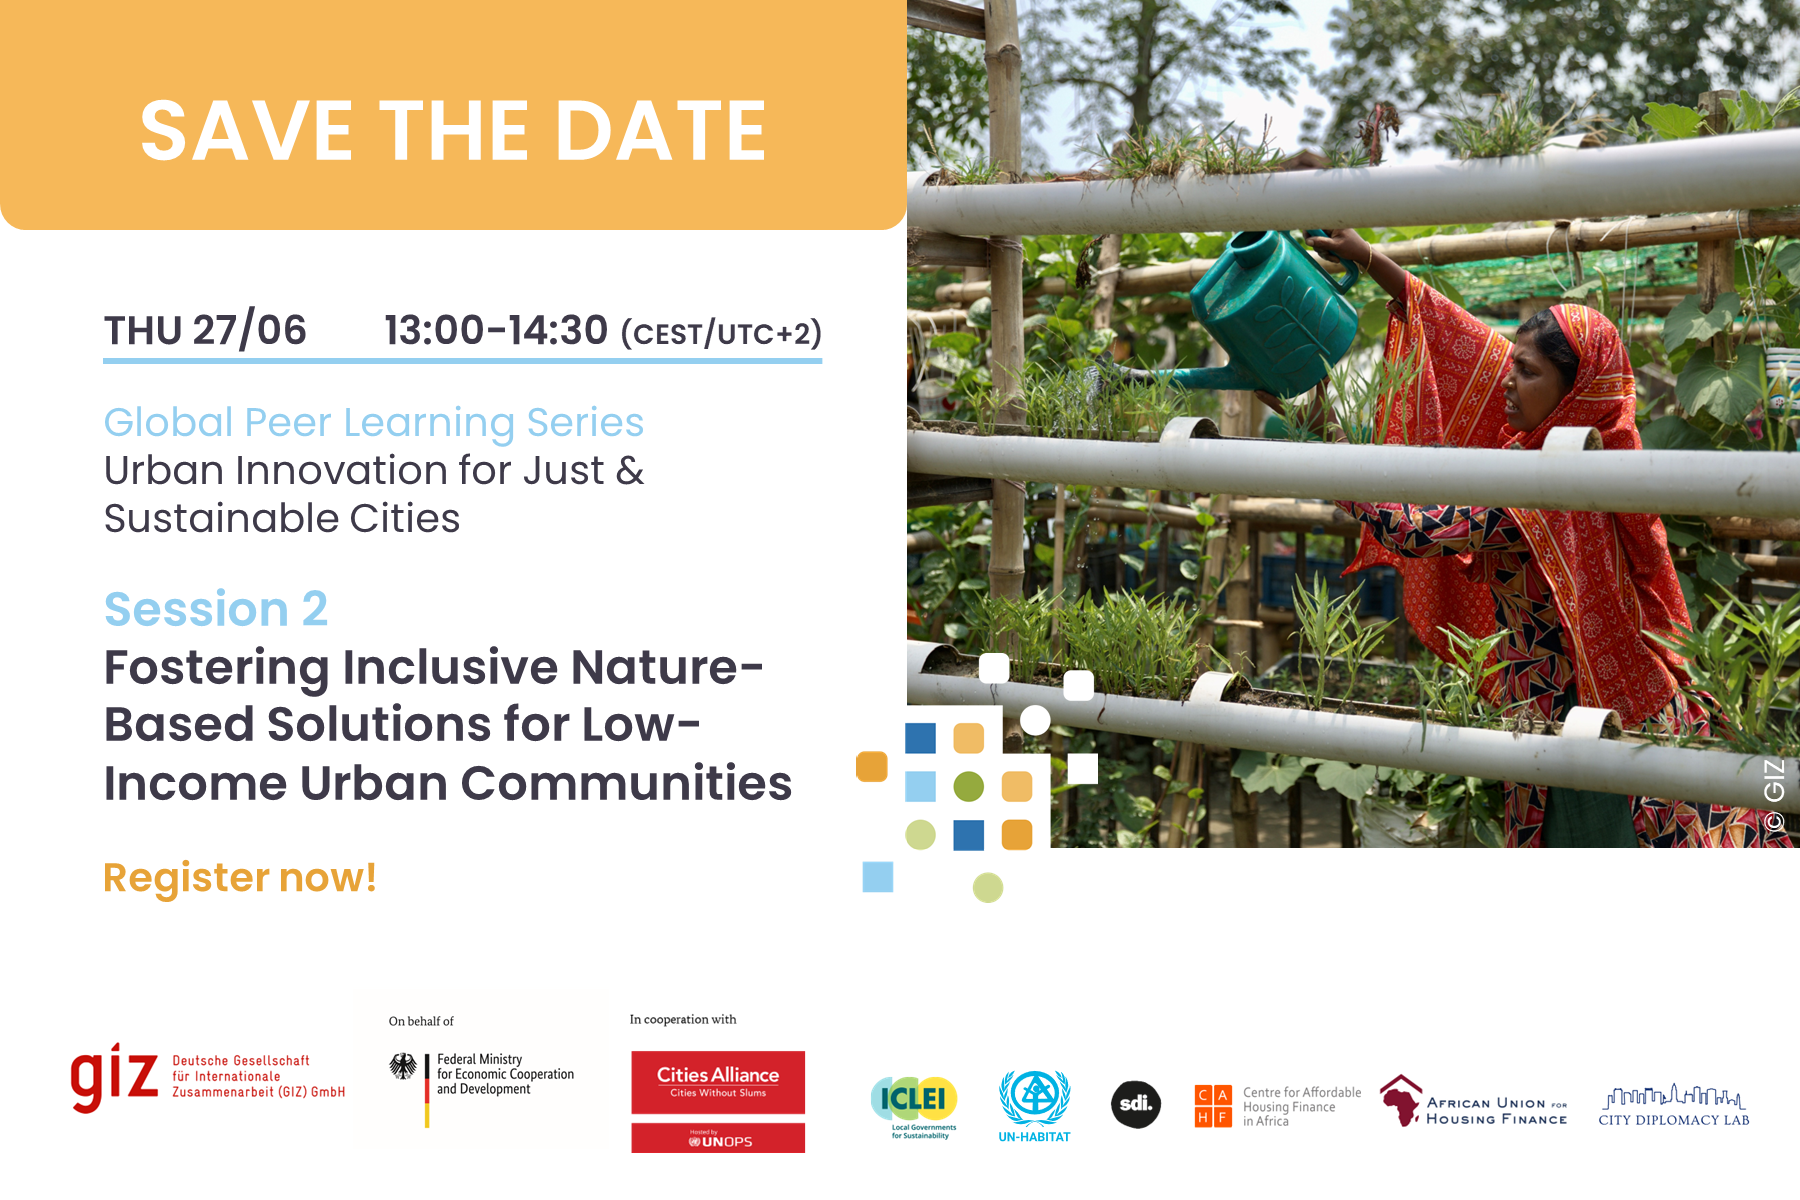 Fostering inclusive nature-based solutions for low-income urban communities